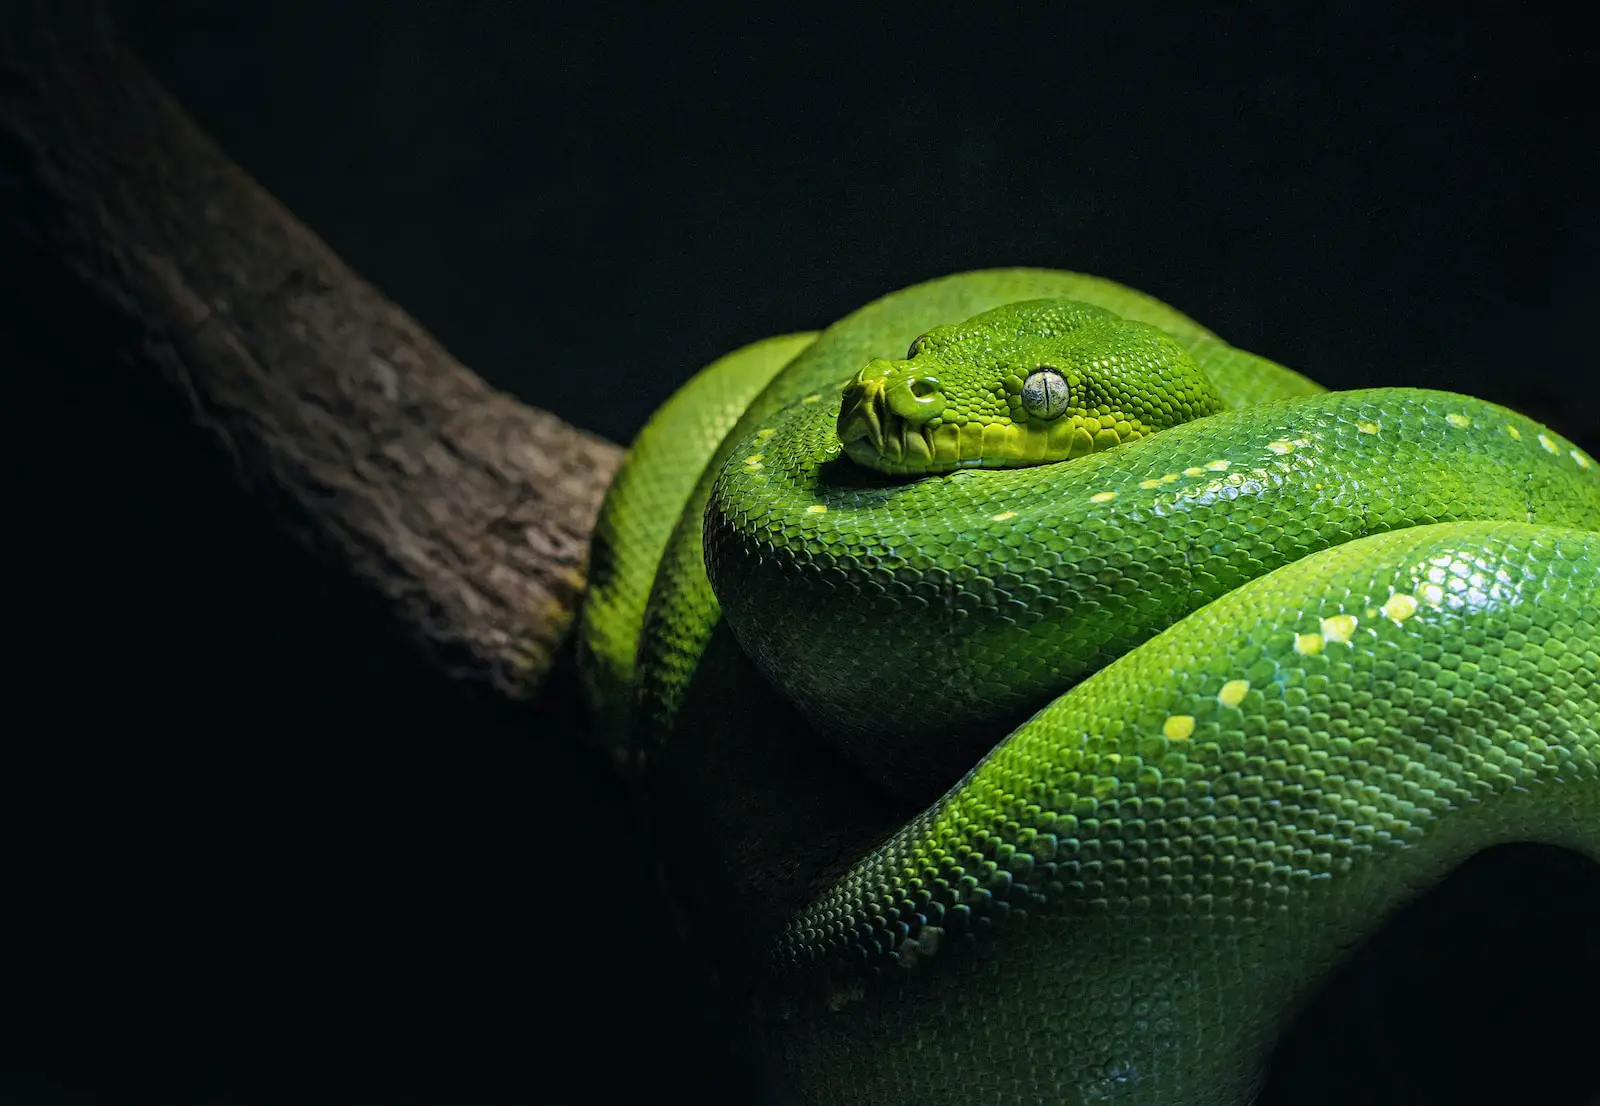 How to Tell if a Snake Is Poisonous?